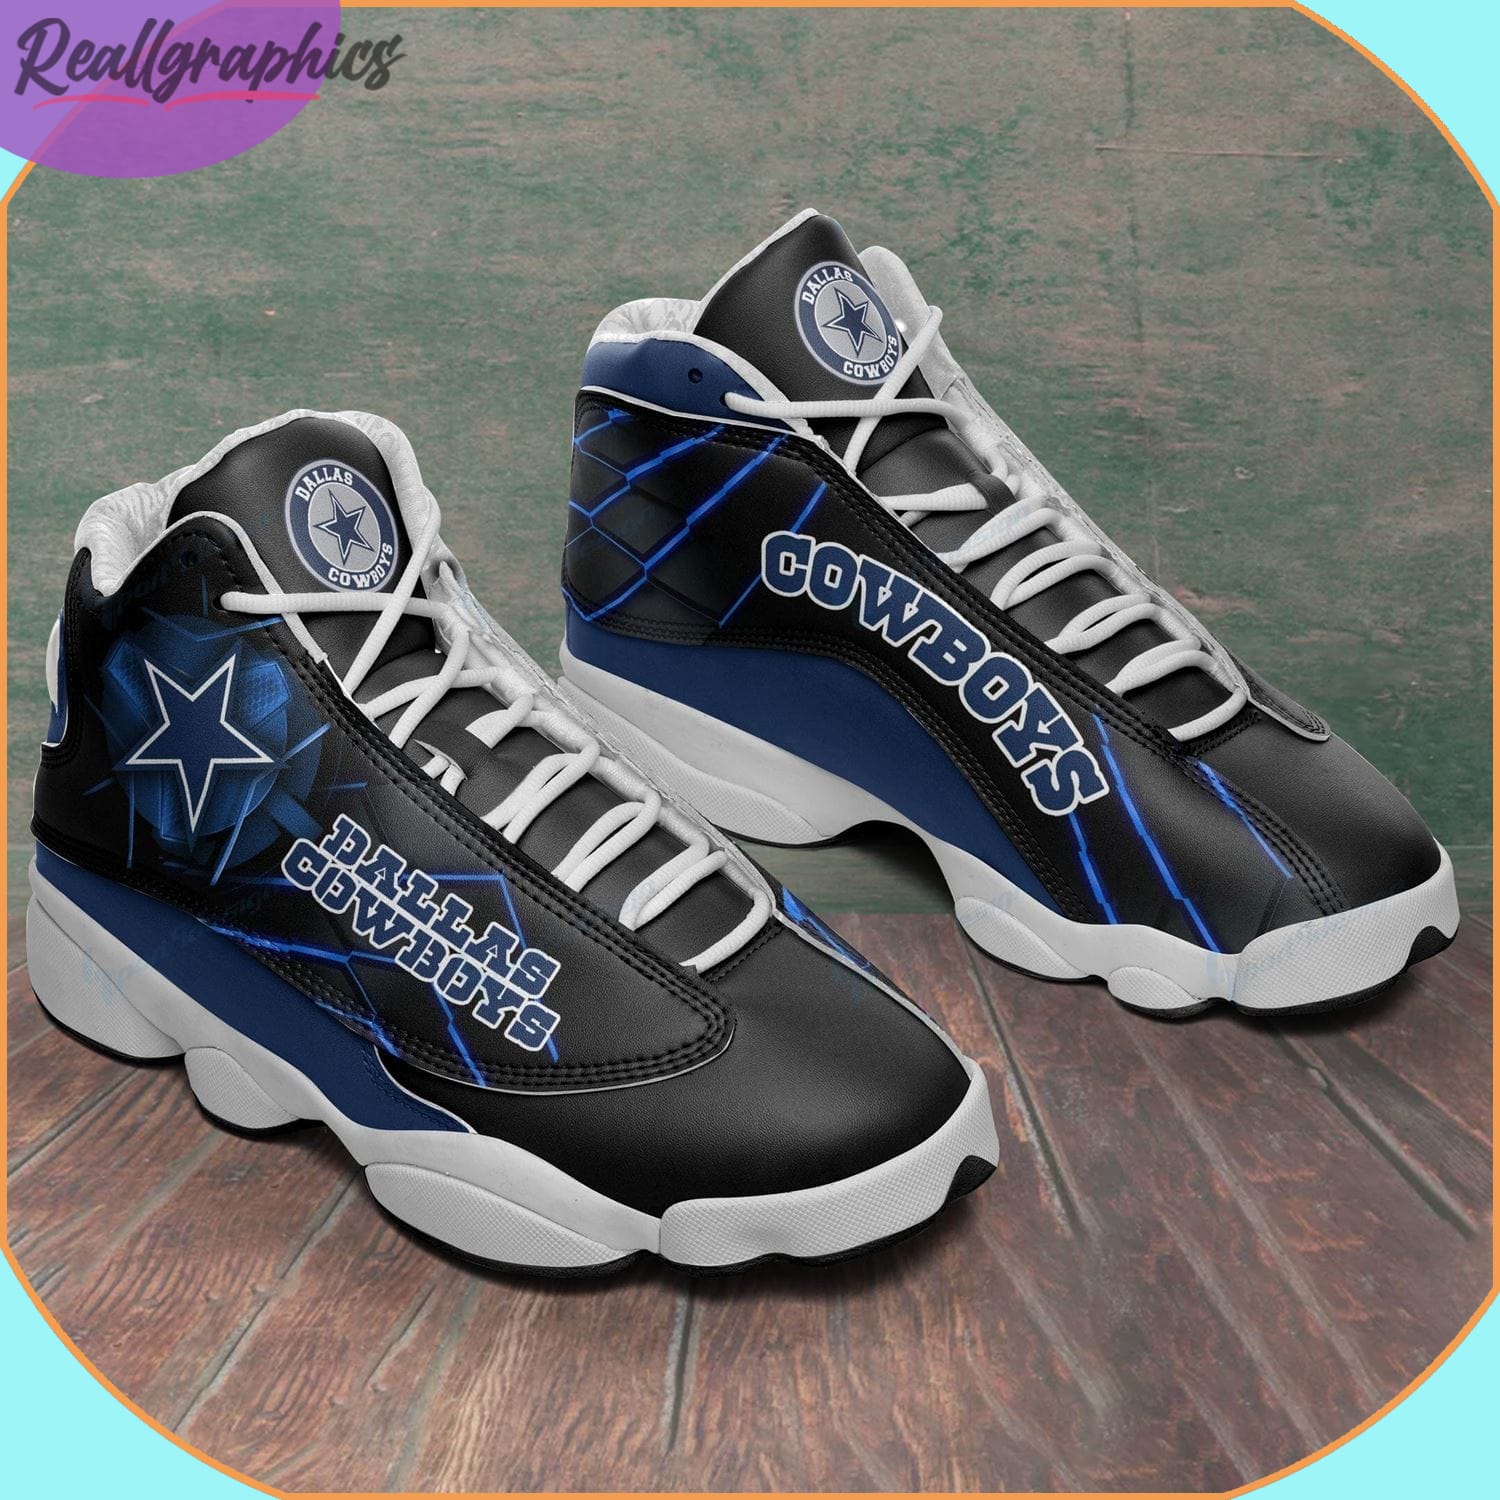 New York Giants Limited Edition Air Jordan 13 Sneakers Shoes For Fans -  Banantees